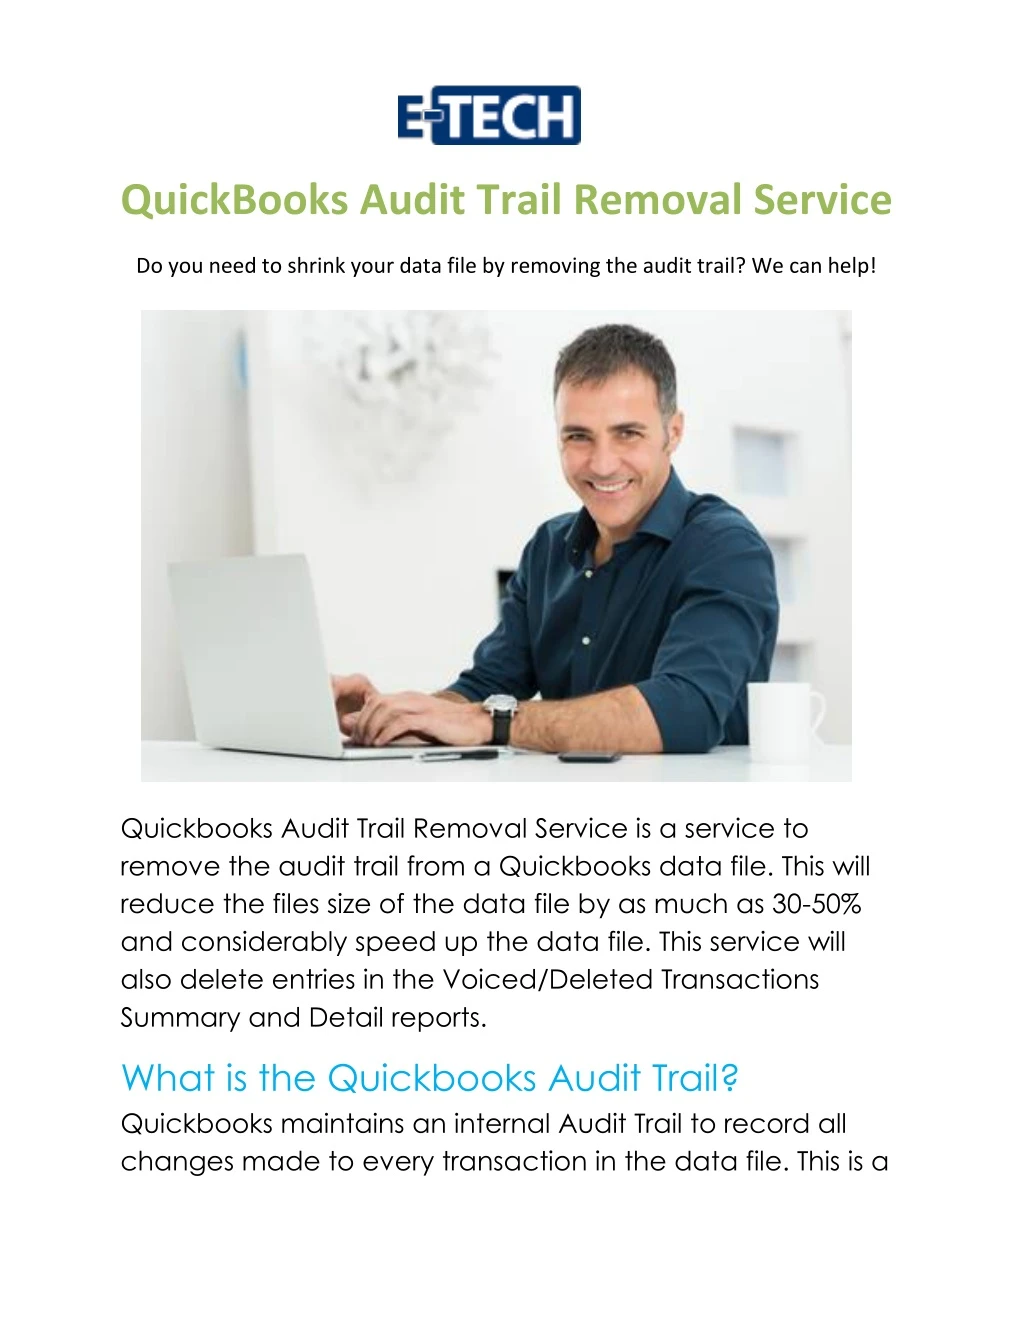 quickbooks audit trail removal service